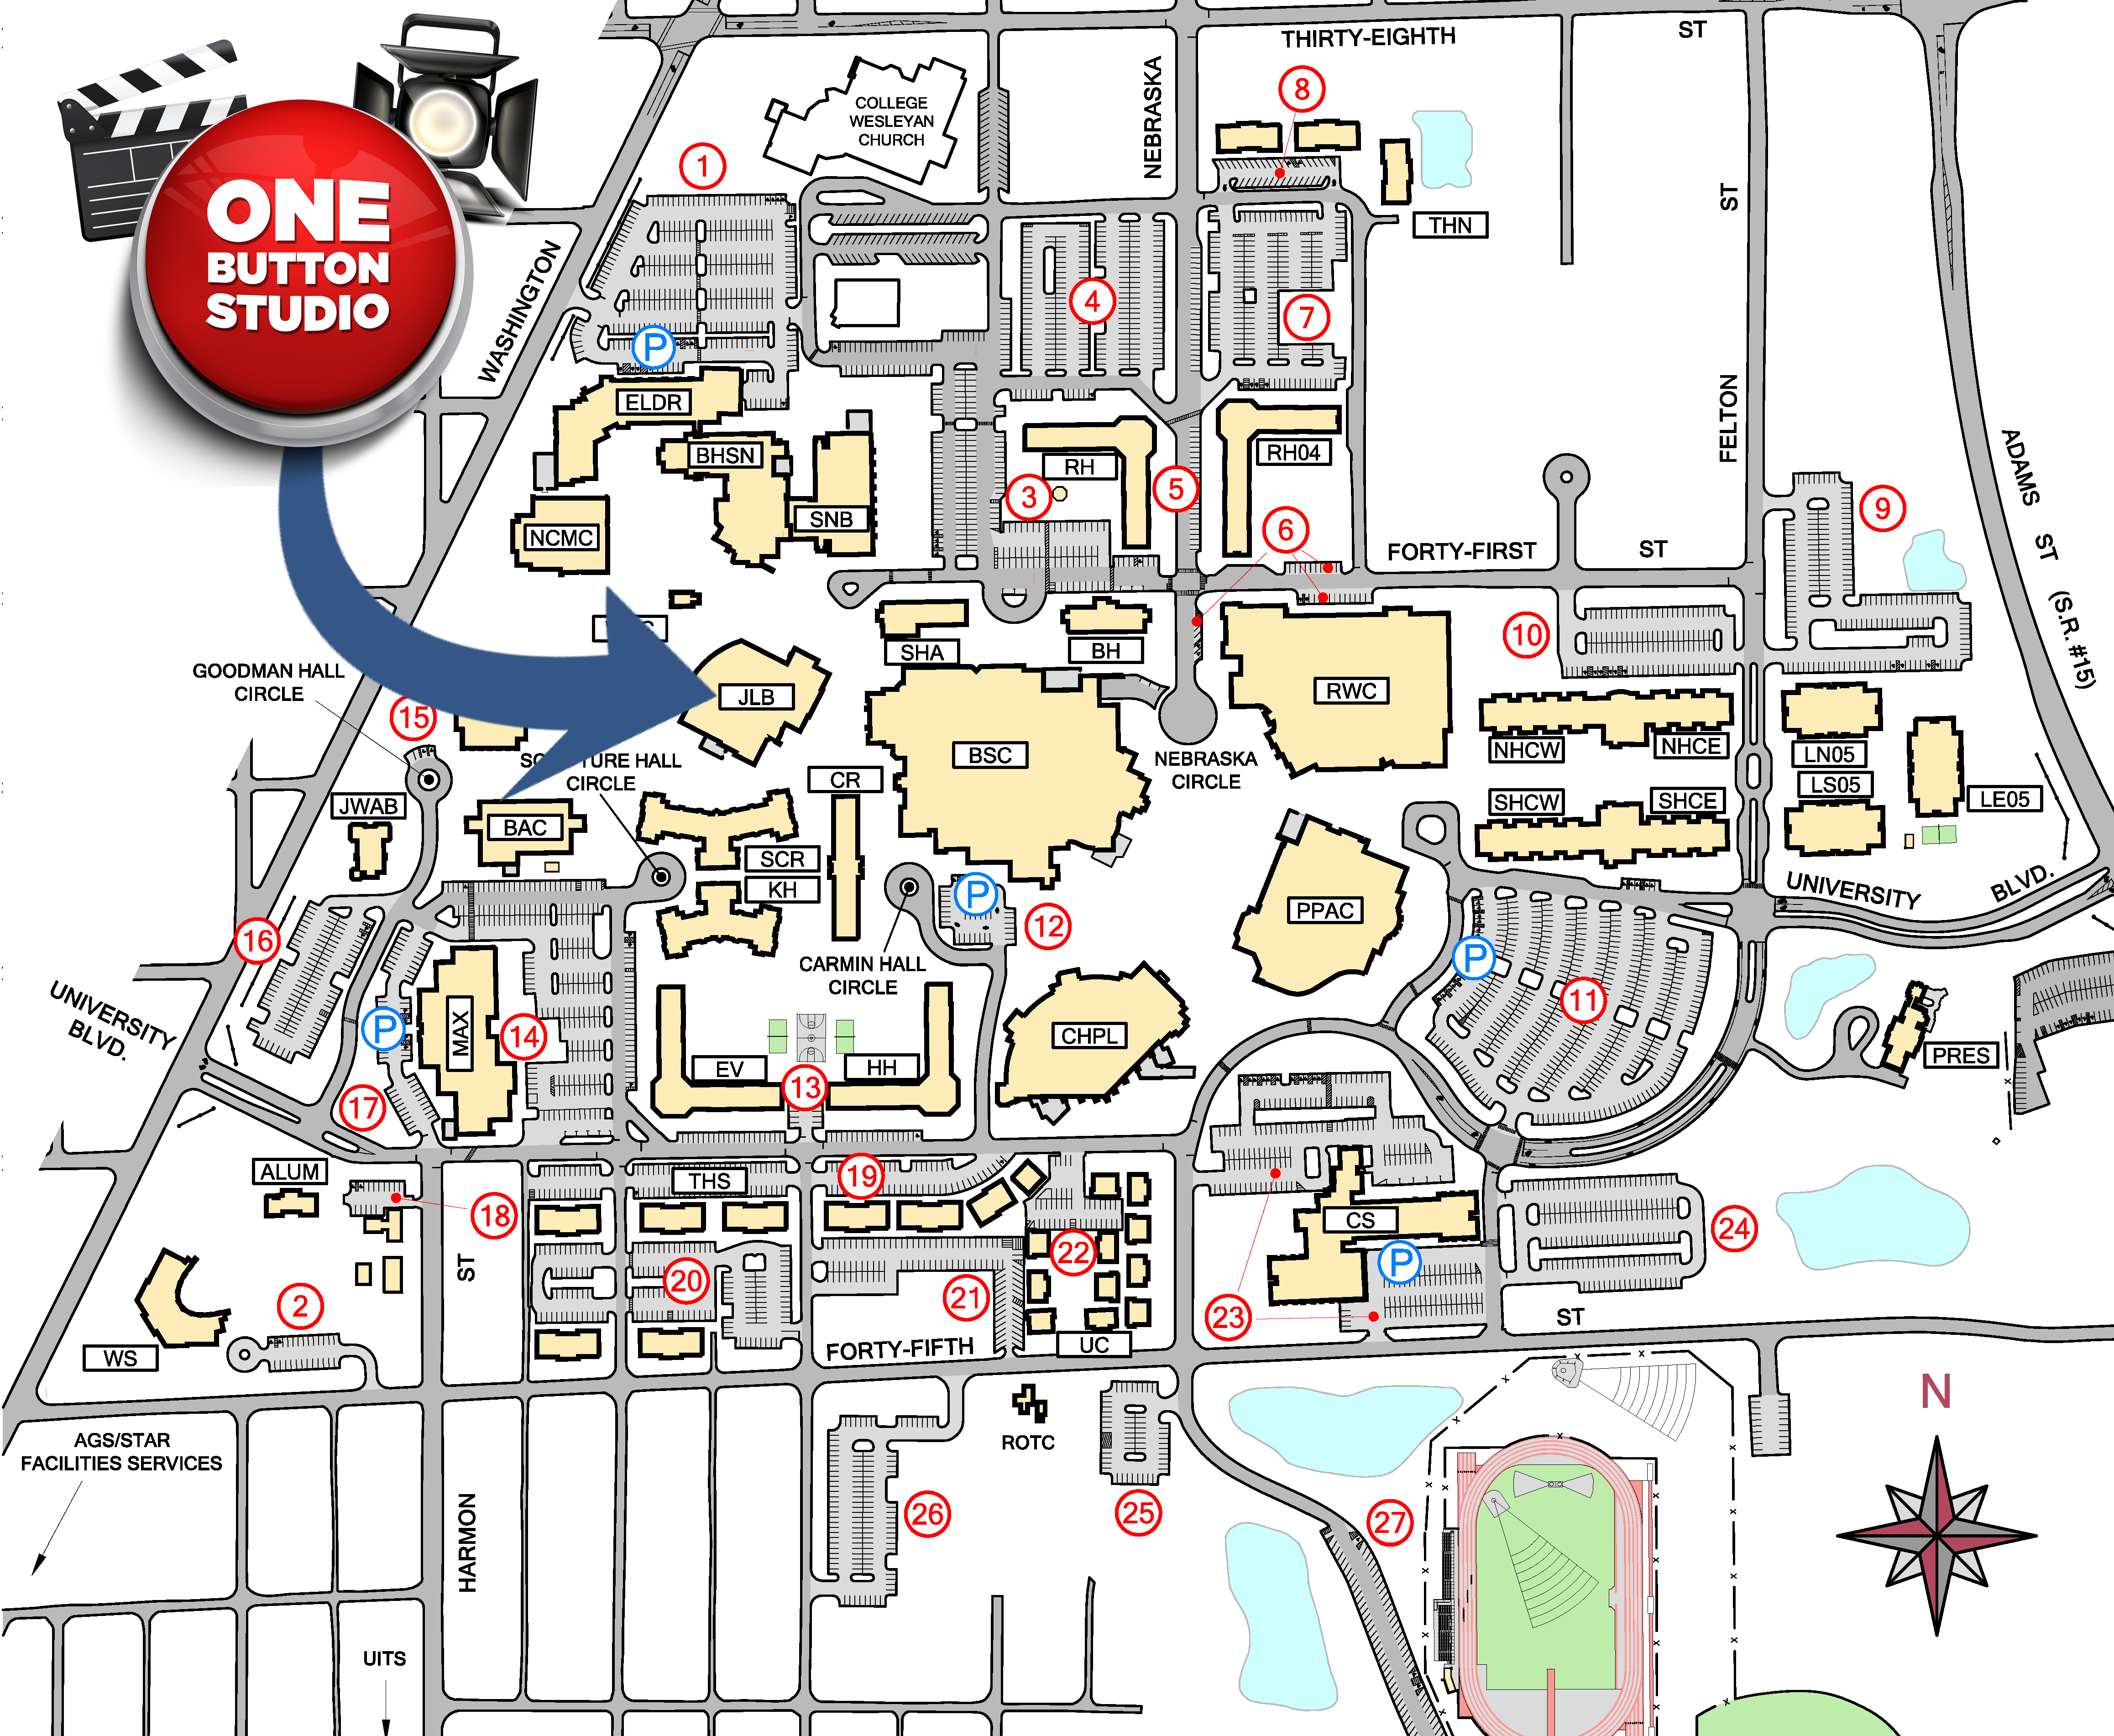 About The One Button Studio Indiana Wesleyan University Support